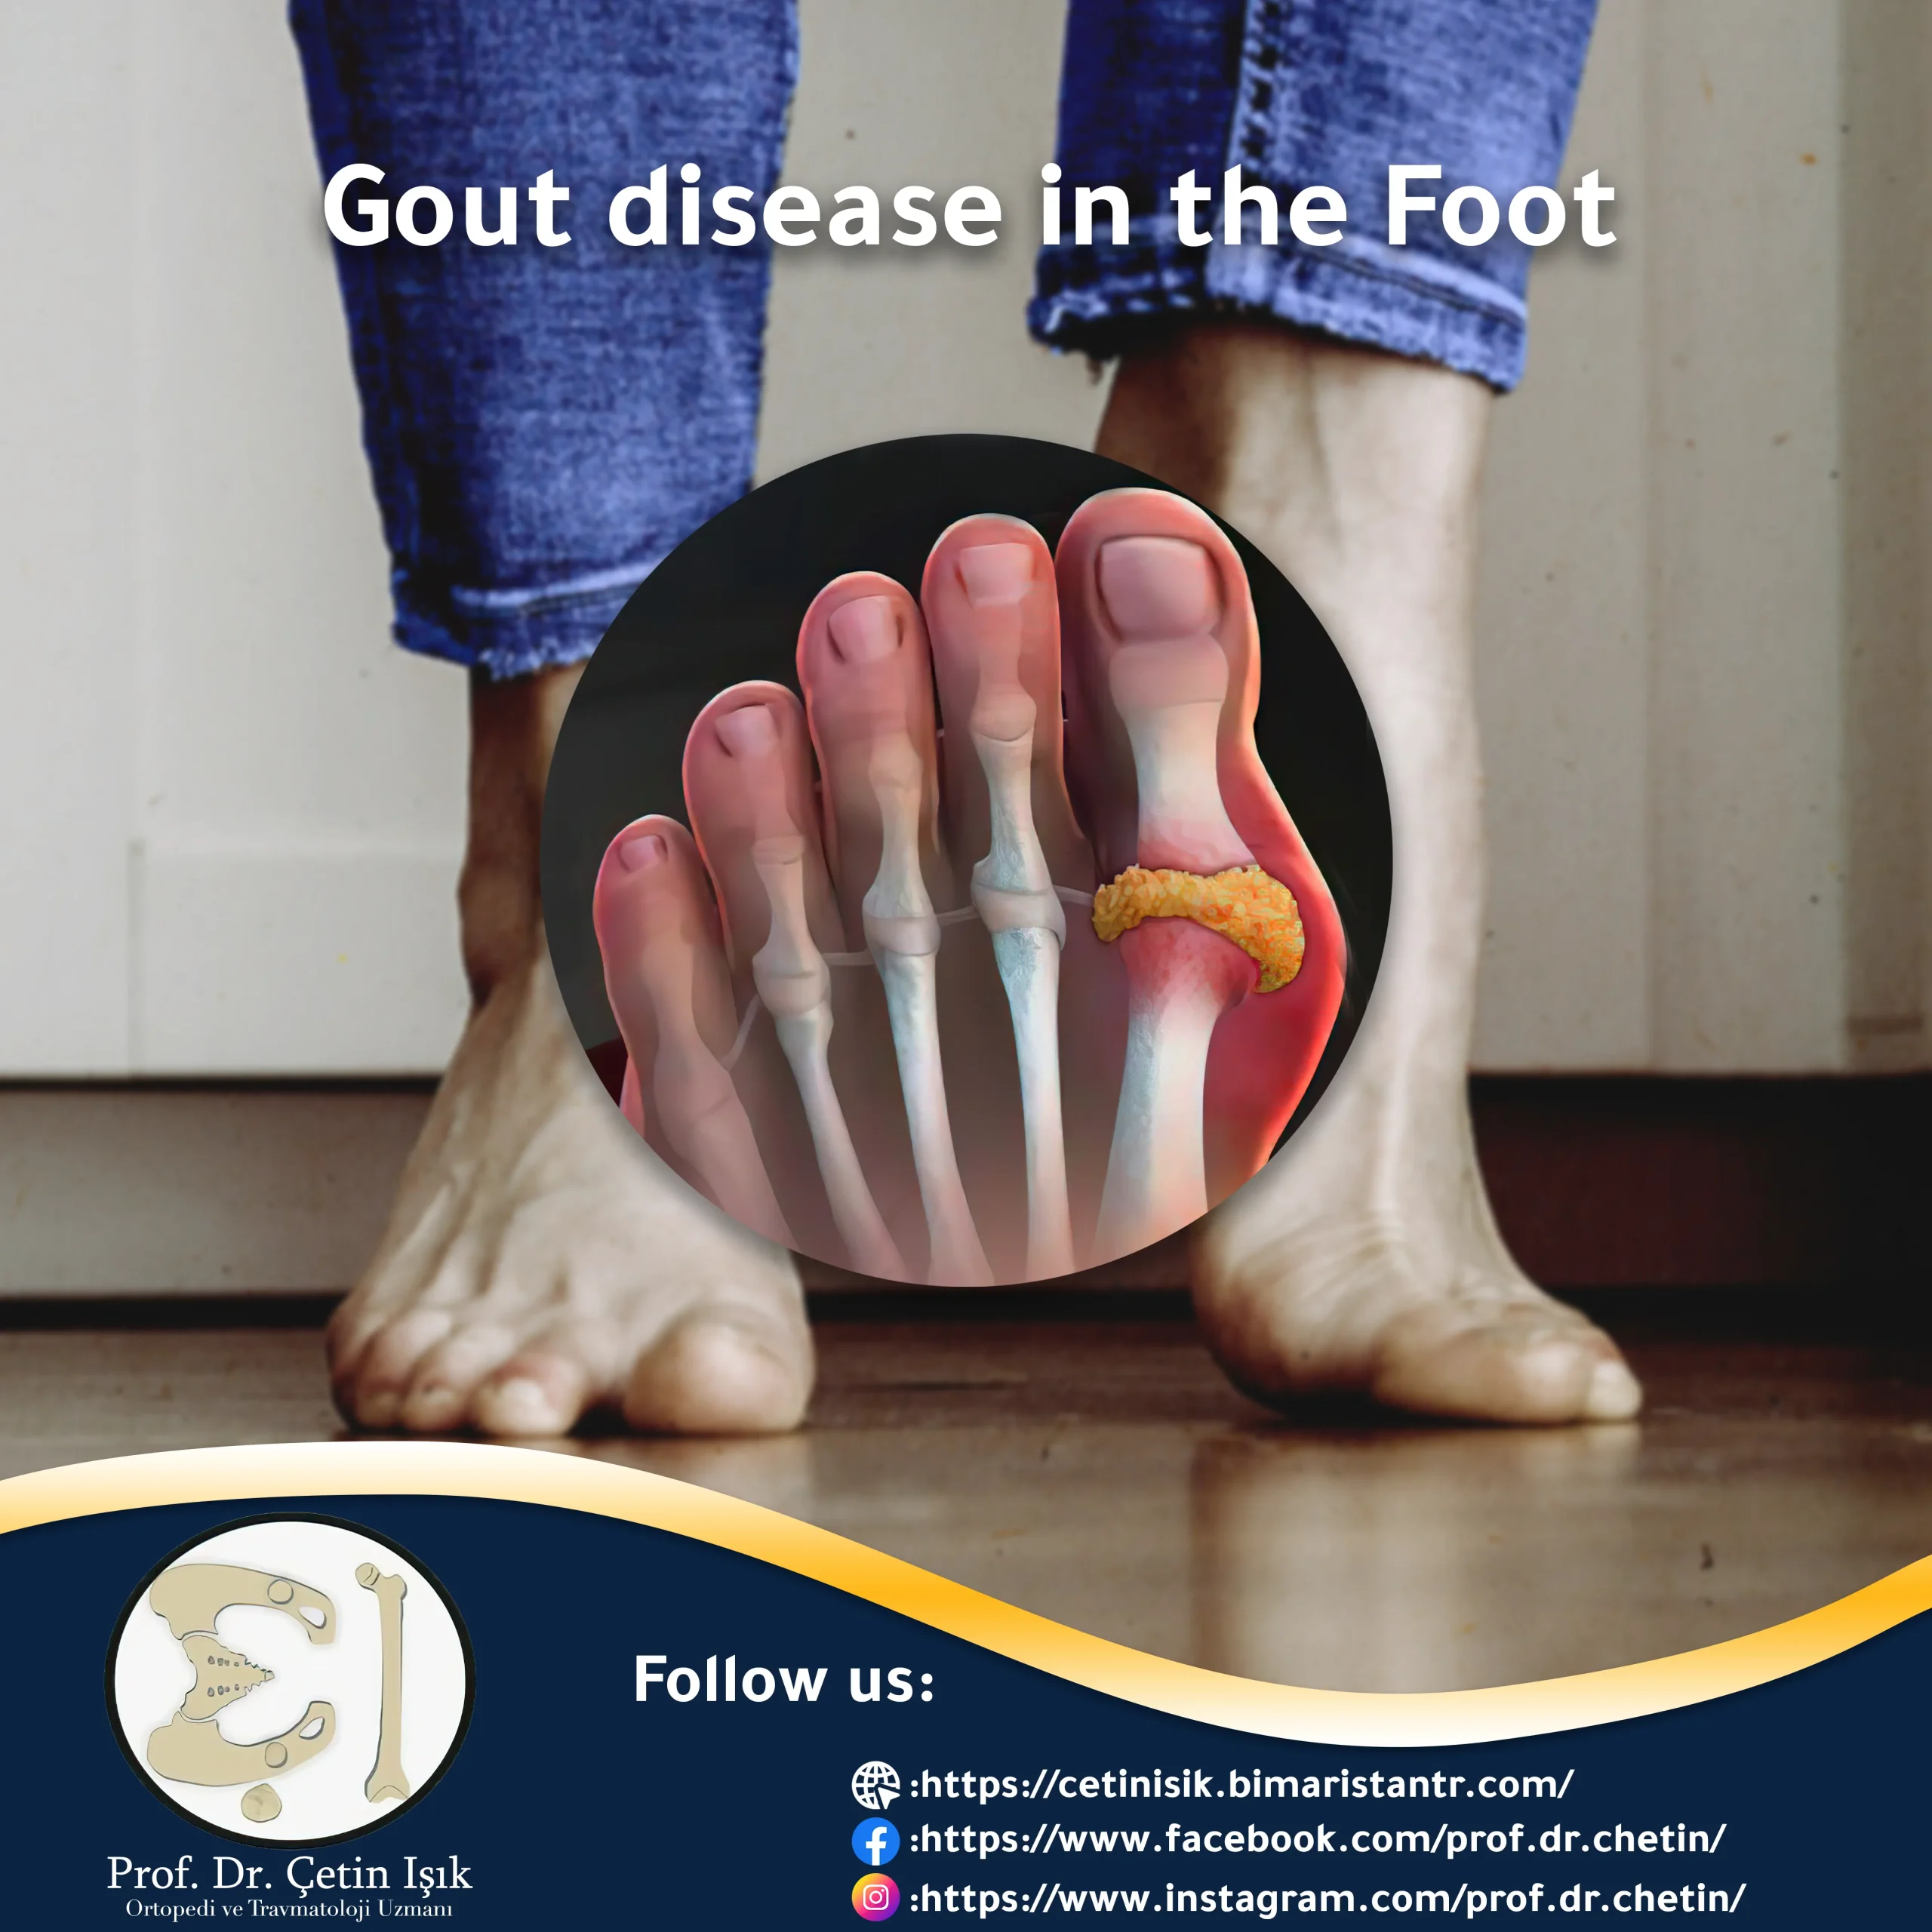 A picture of gout in the foot